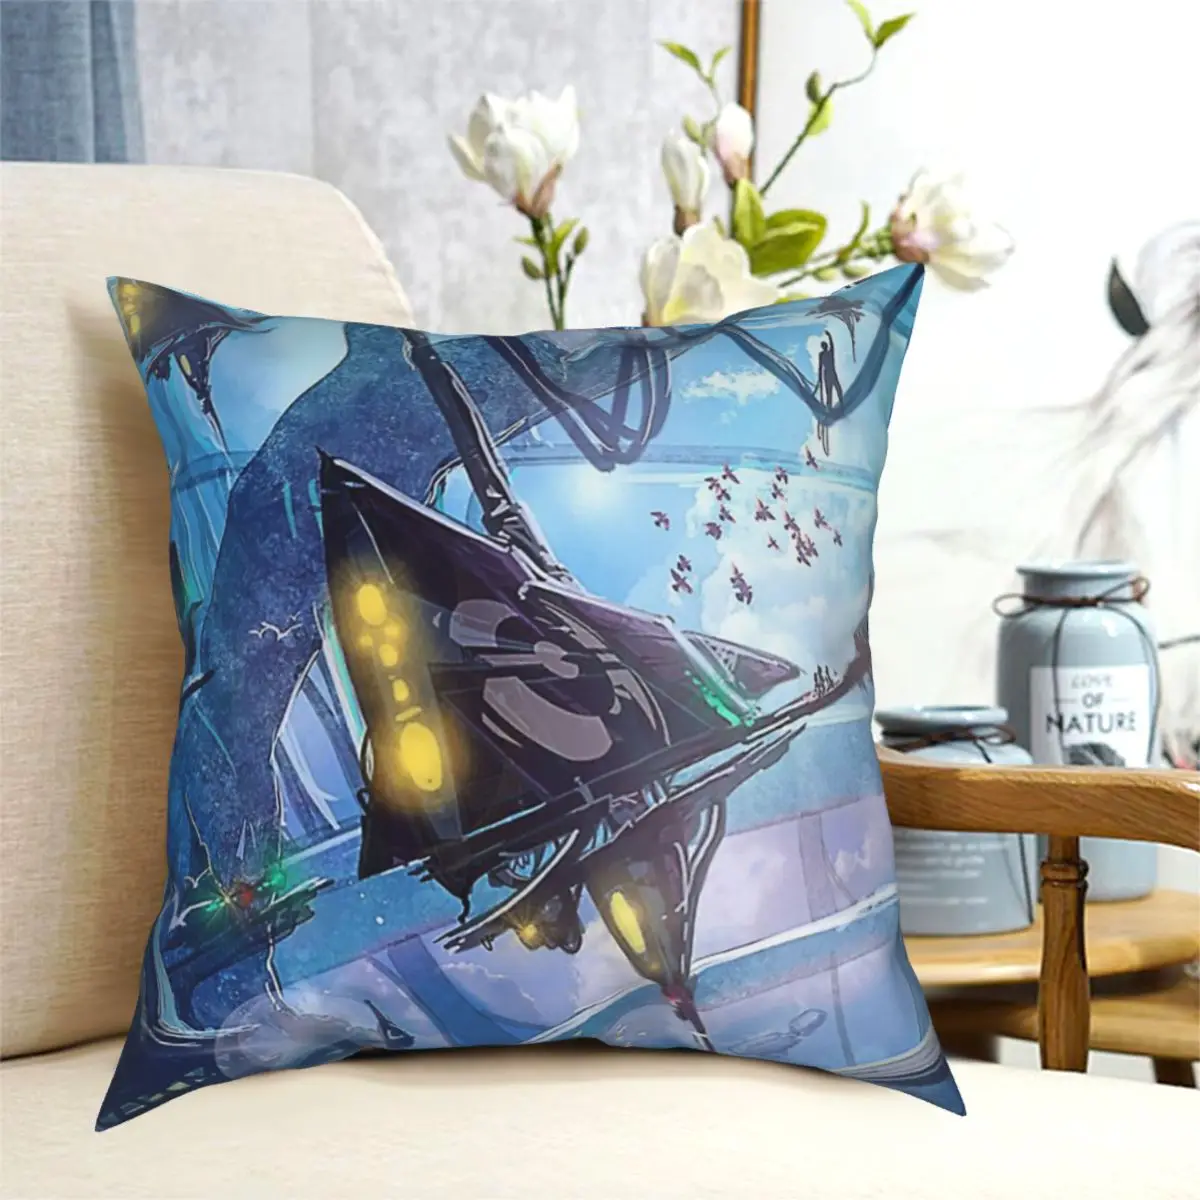 

space station Gaia Station Floor Pillow Cushion Cover Decorative Pillowcases Case Home Sofa Cushions 40x40,45x45cm(Double Sides)